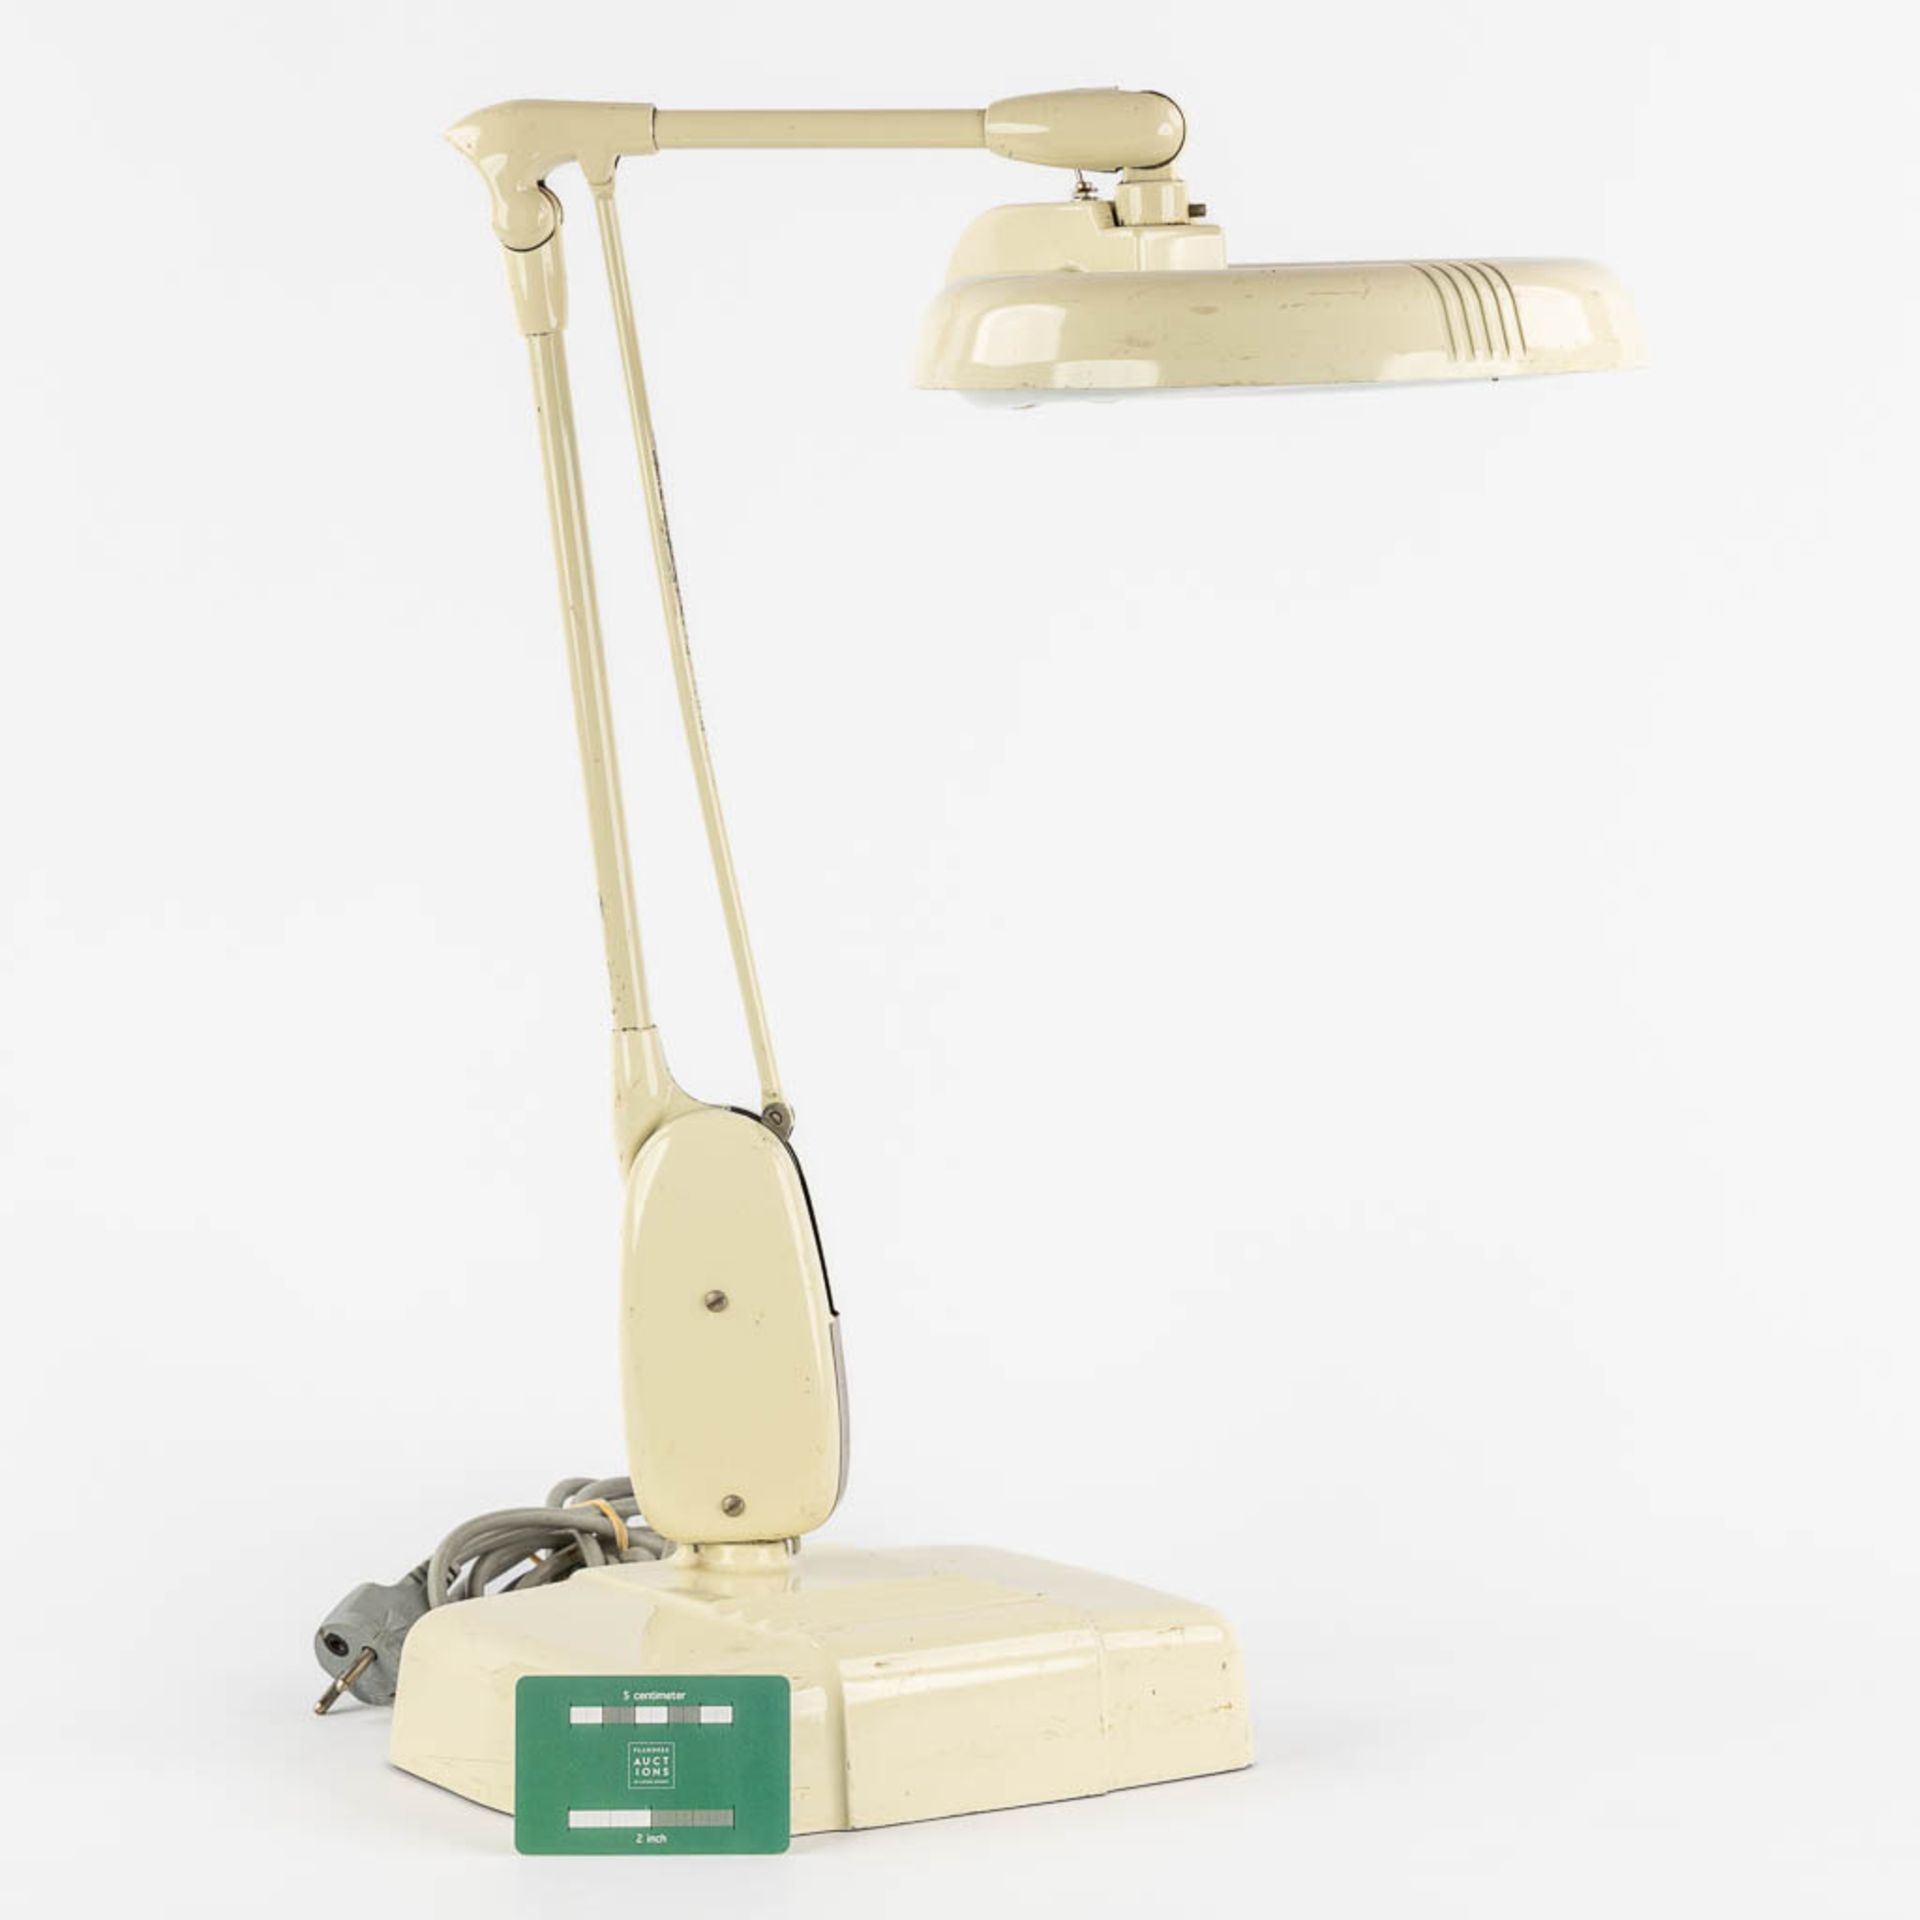 Dazor, M-1470, a mid-century reading/table lamp. (L:18 x W:26 x H:54 cm) - Image 2 of 13